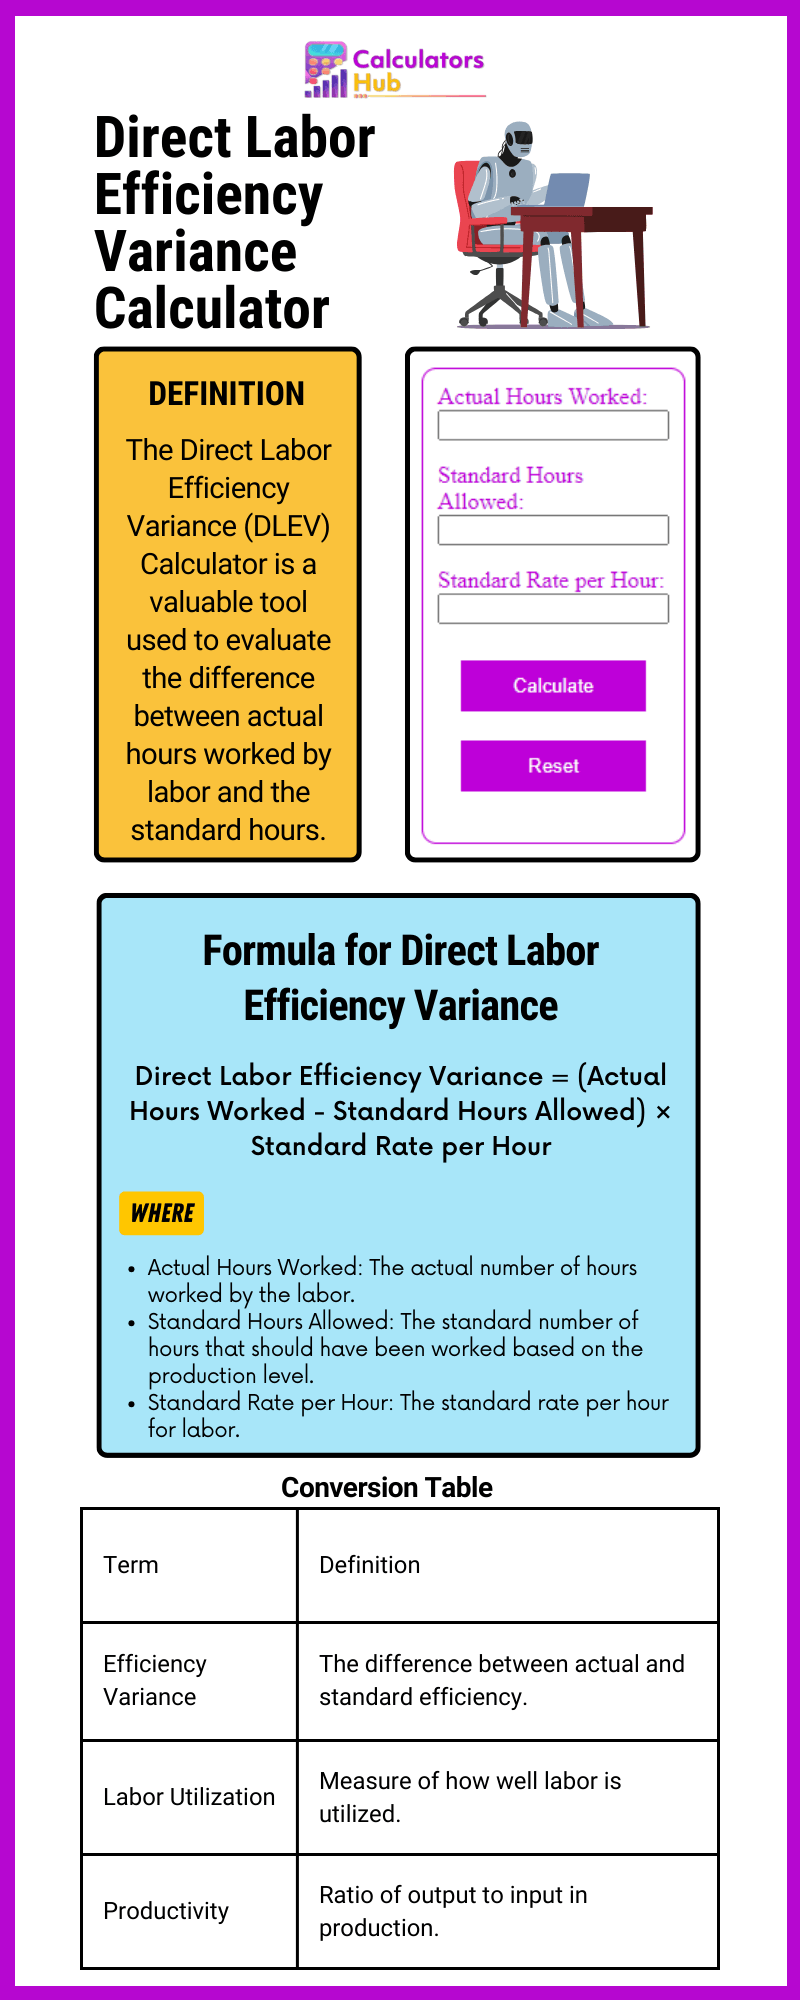 Direct Labor Efficiency Variance Calculator